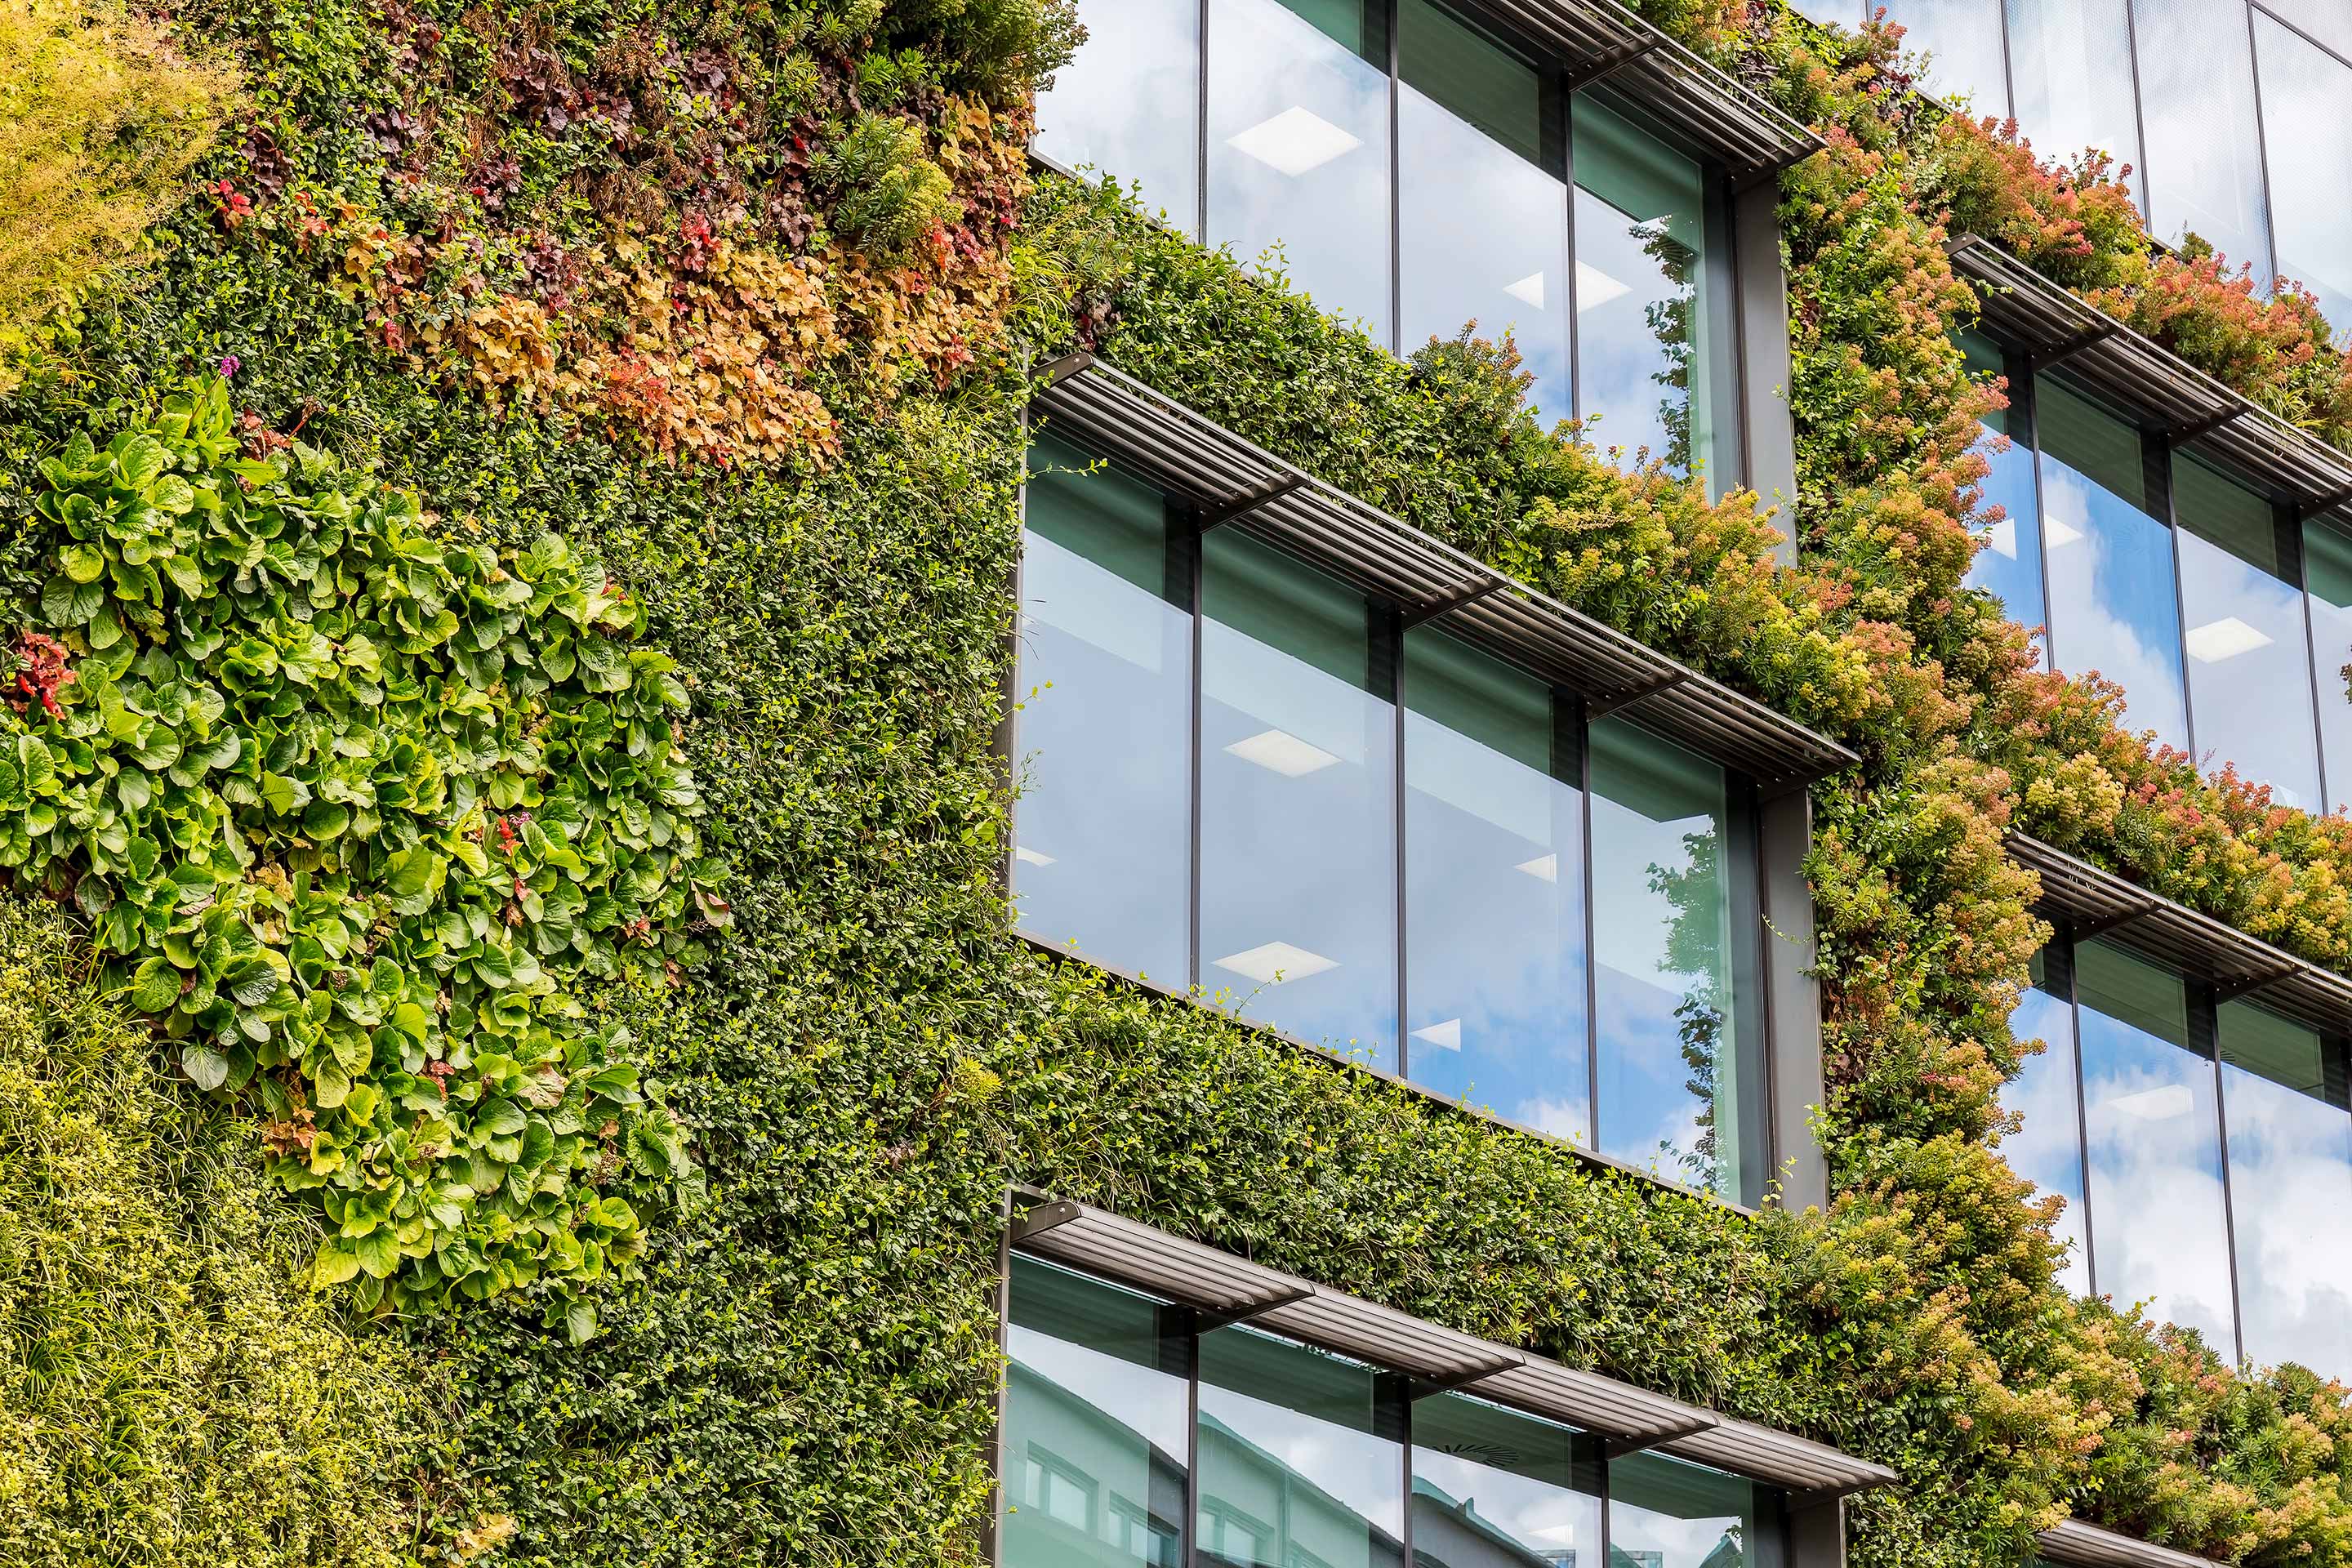 Picture of windows on a modern building, covered in lush greenery